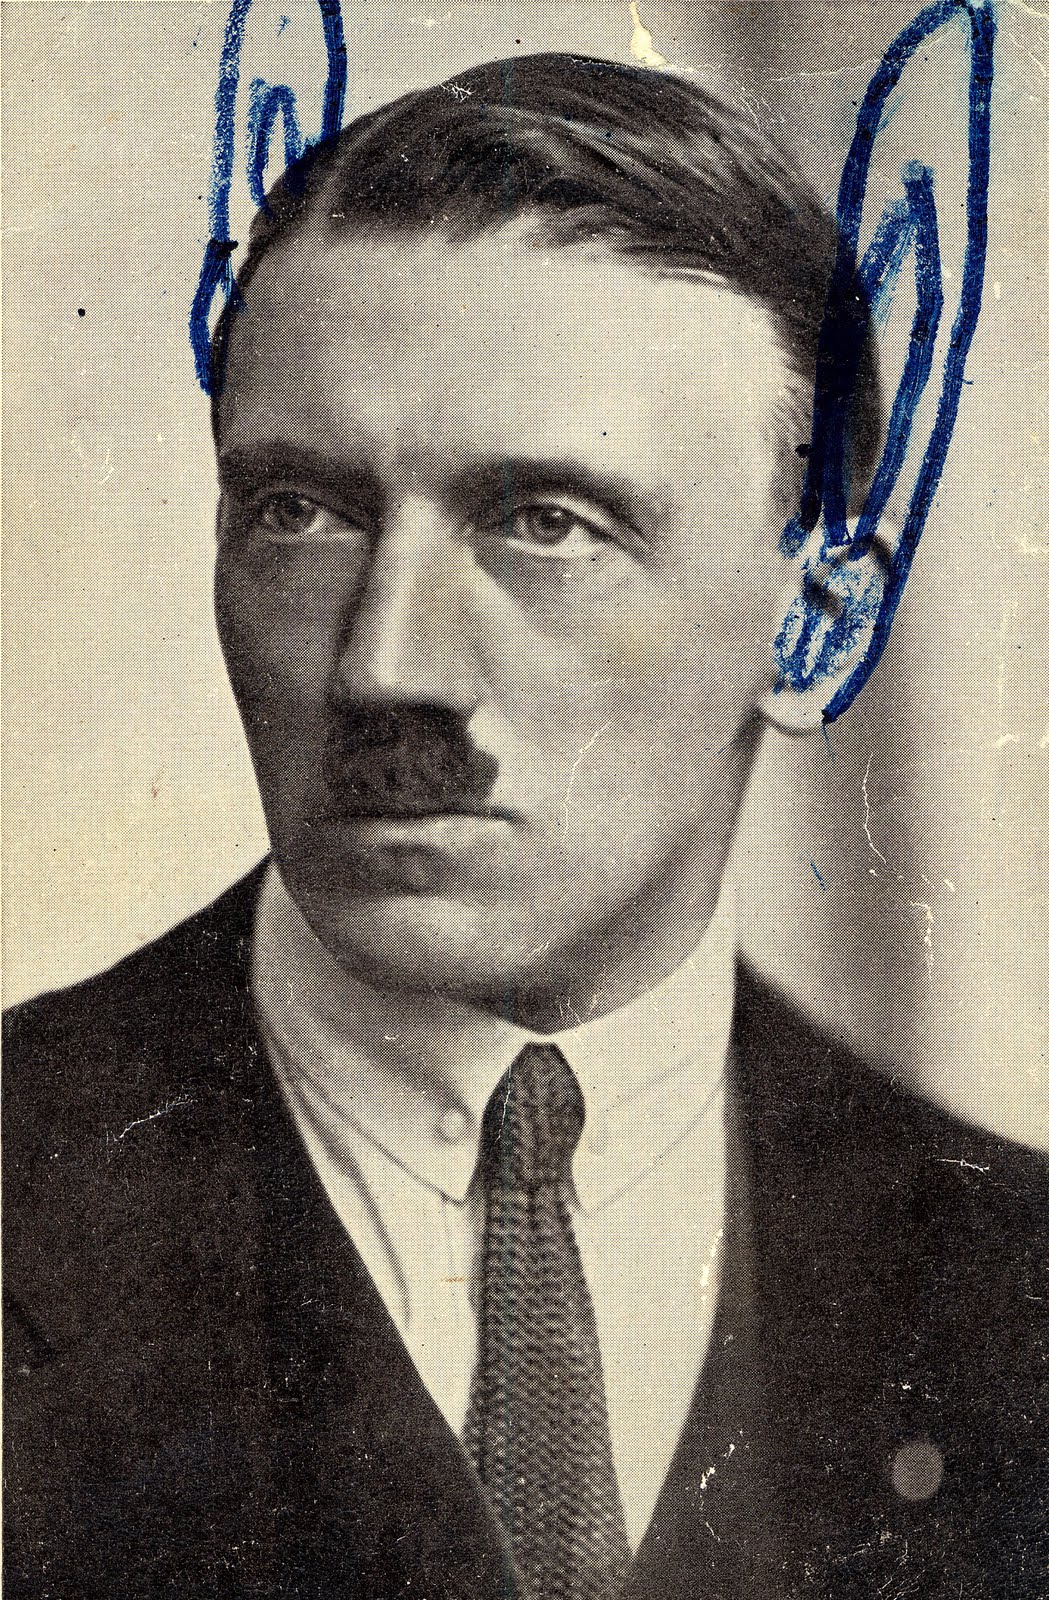 Picture of Hitler with hand drawn donkey ears